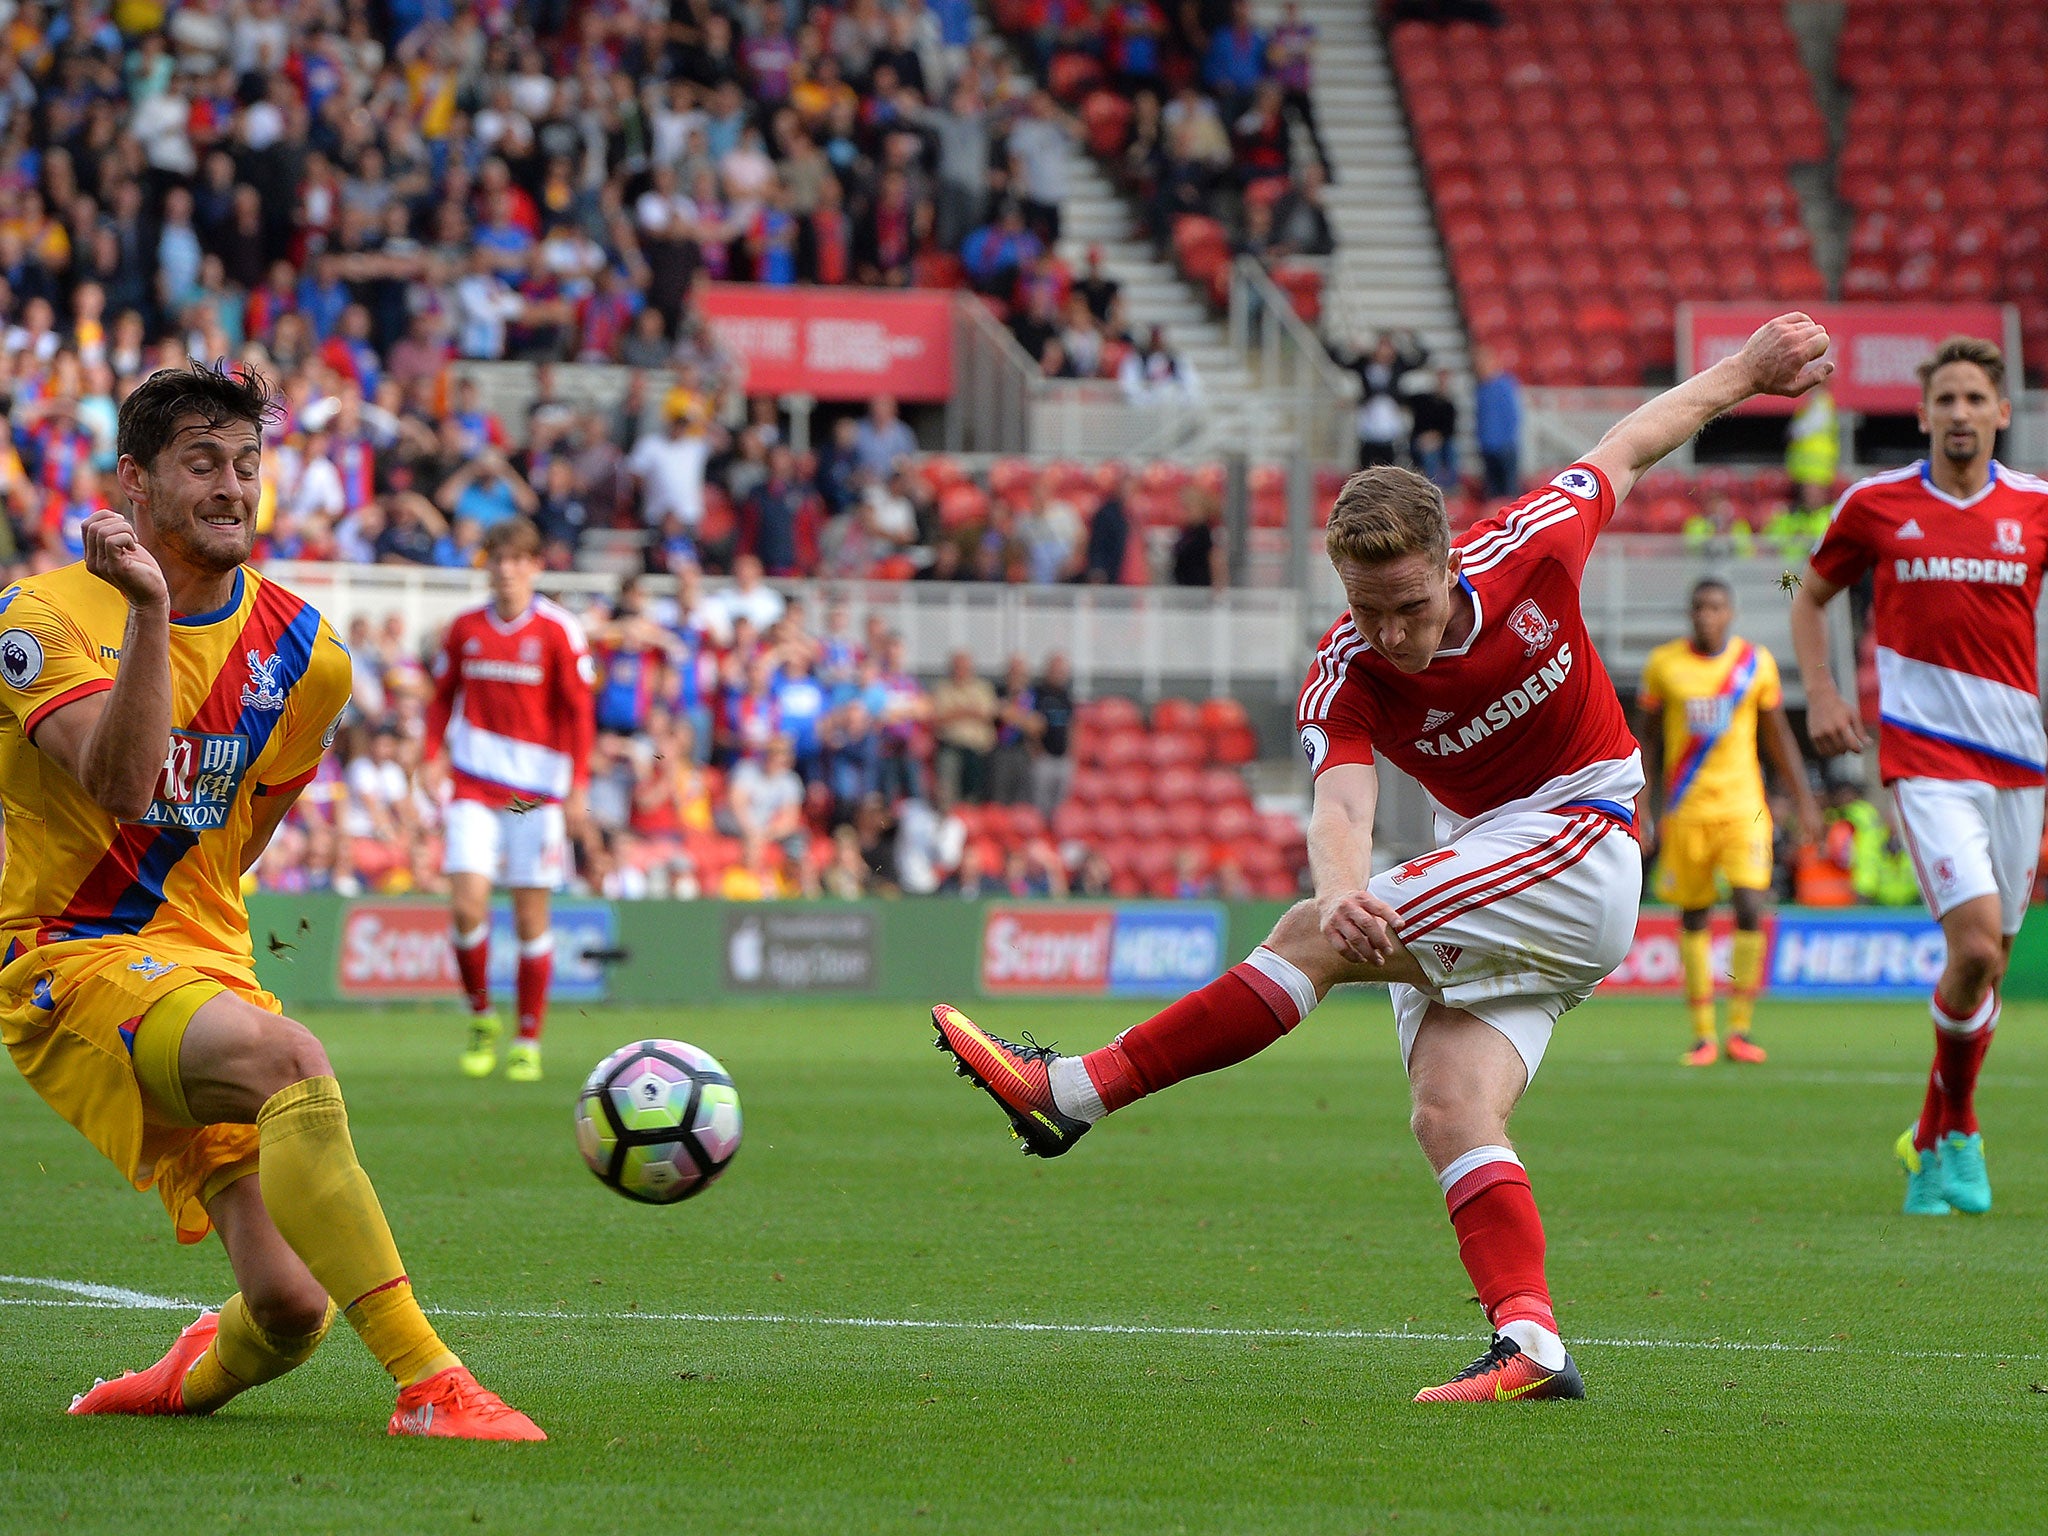 Forshaw shoots during Middlesbrough's recent clash with Crystal Palace